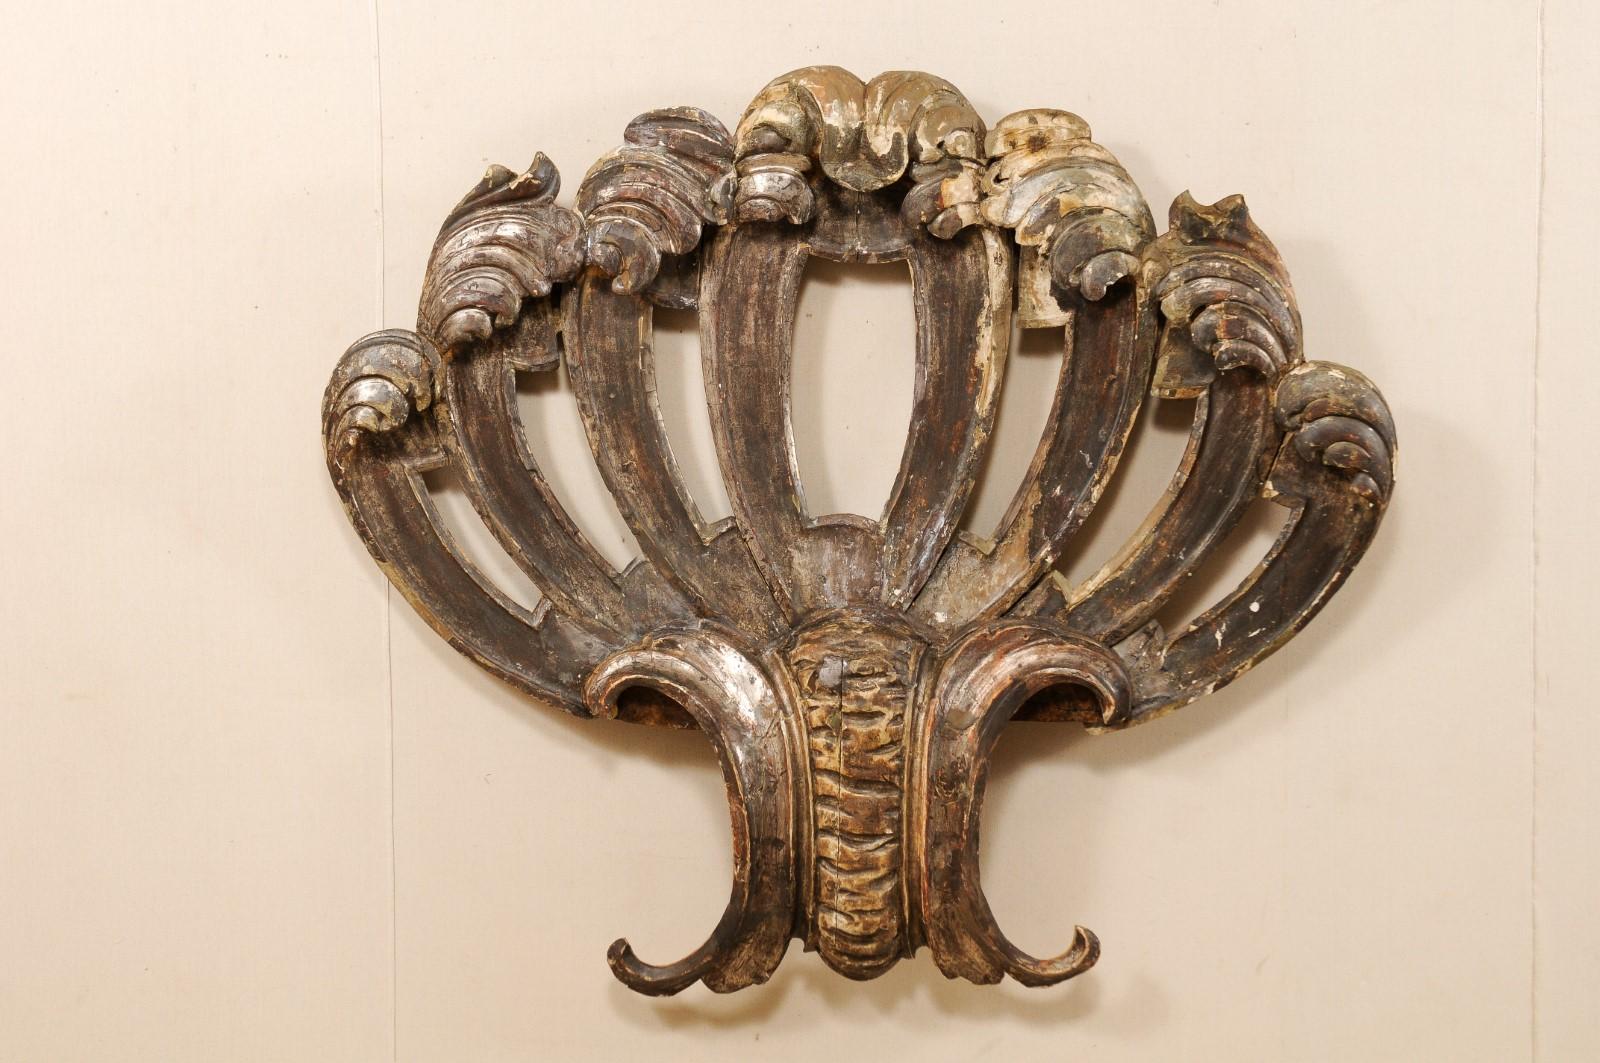 A large-sized Italian Baroque carved wood fragment from the 18th century. This antique carved-wood wall hanging from Italy, is impressively sized at over 5 feet wide and 4 1/2 feet tall, and features a stylized hand-carved shell with acanthus leaf